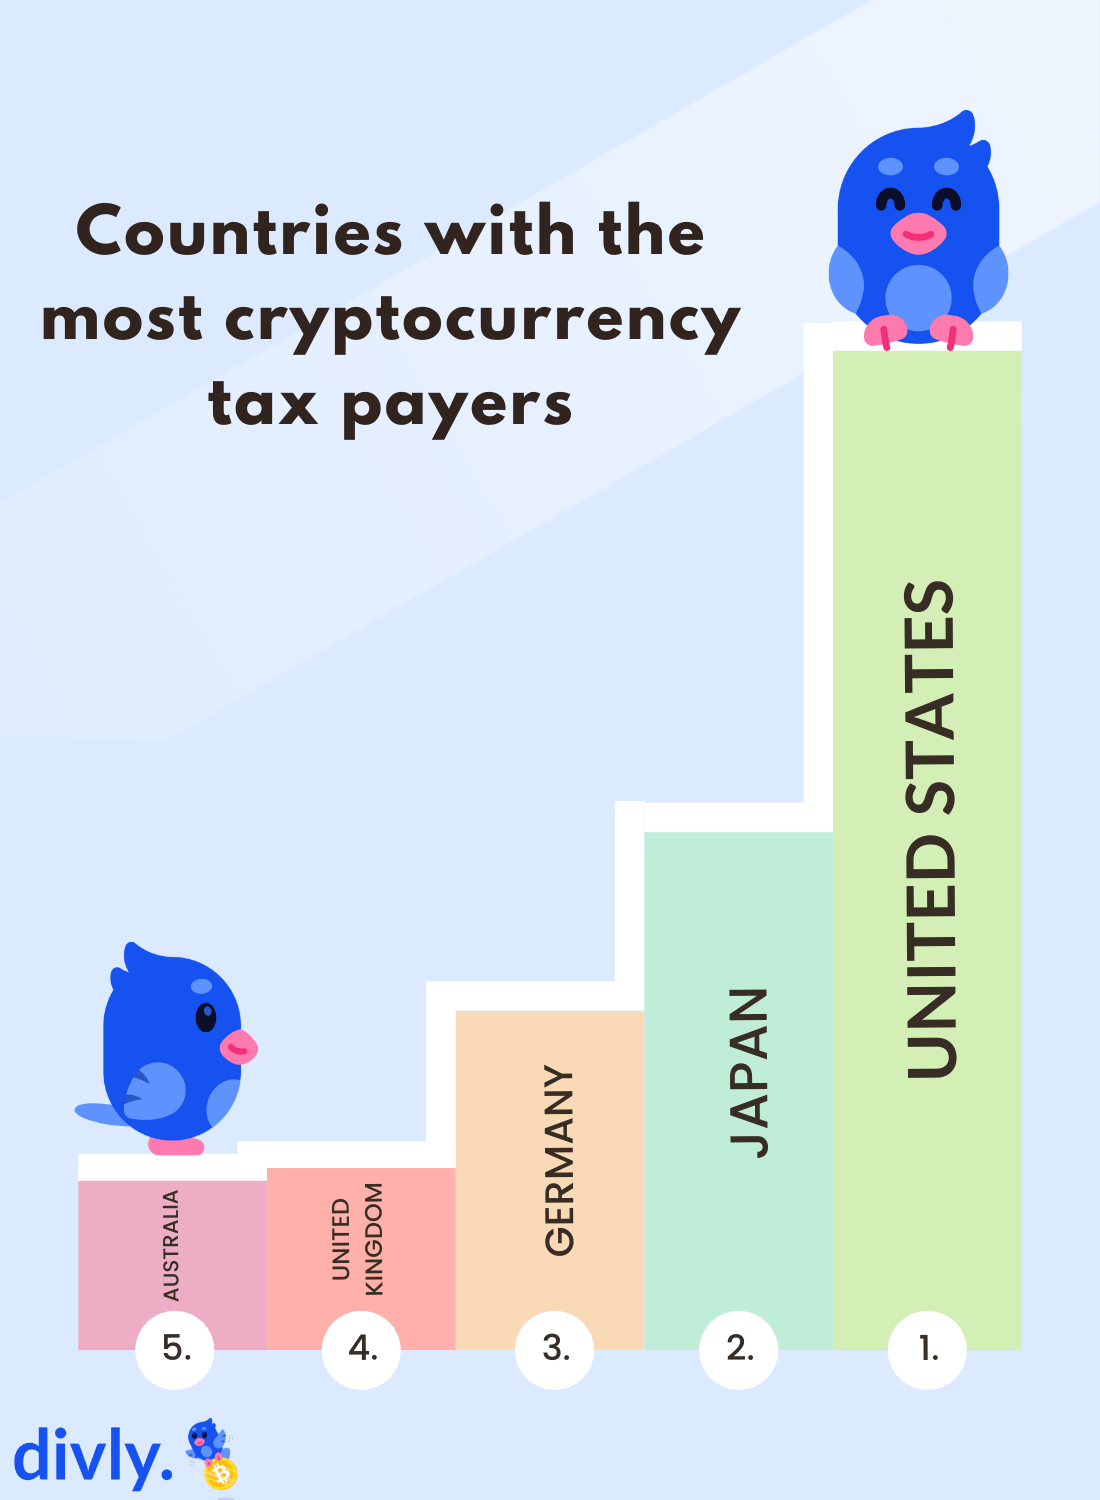 In order the countries with the most cryptocurrency tax payers are The United States, Japan, Germany, the United Kingdom, and Australia